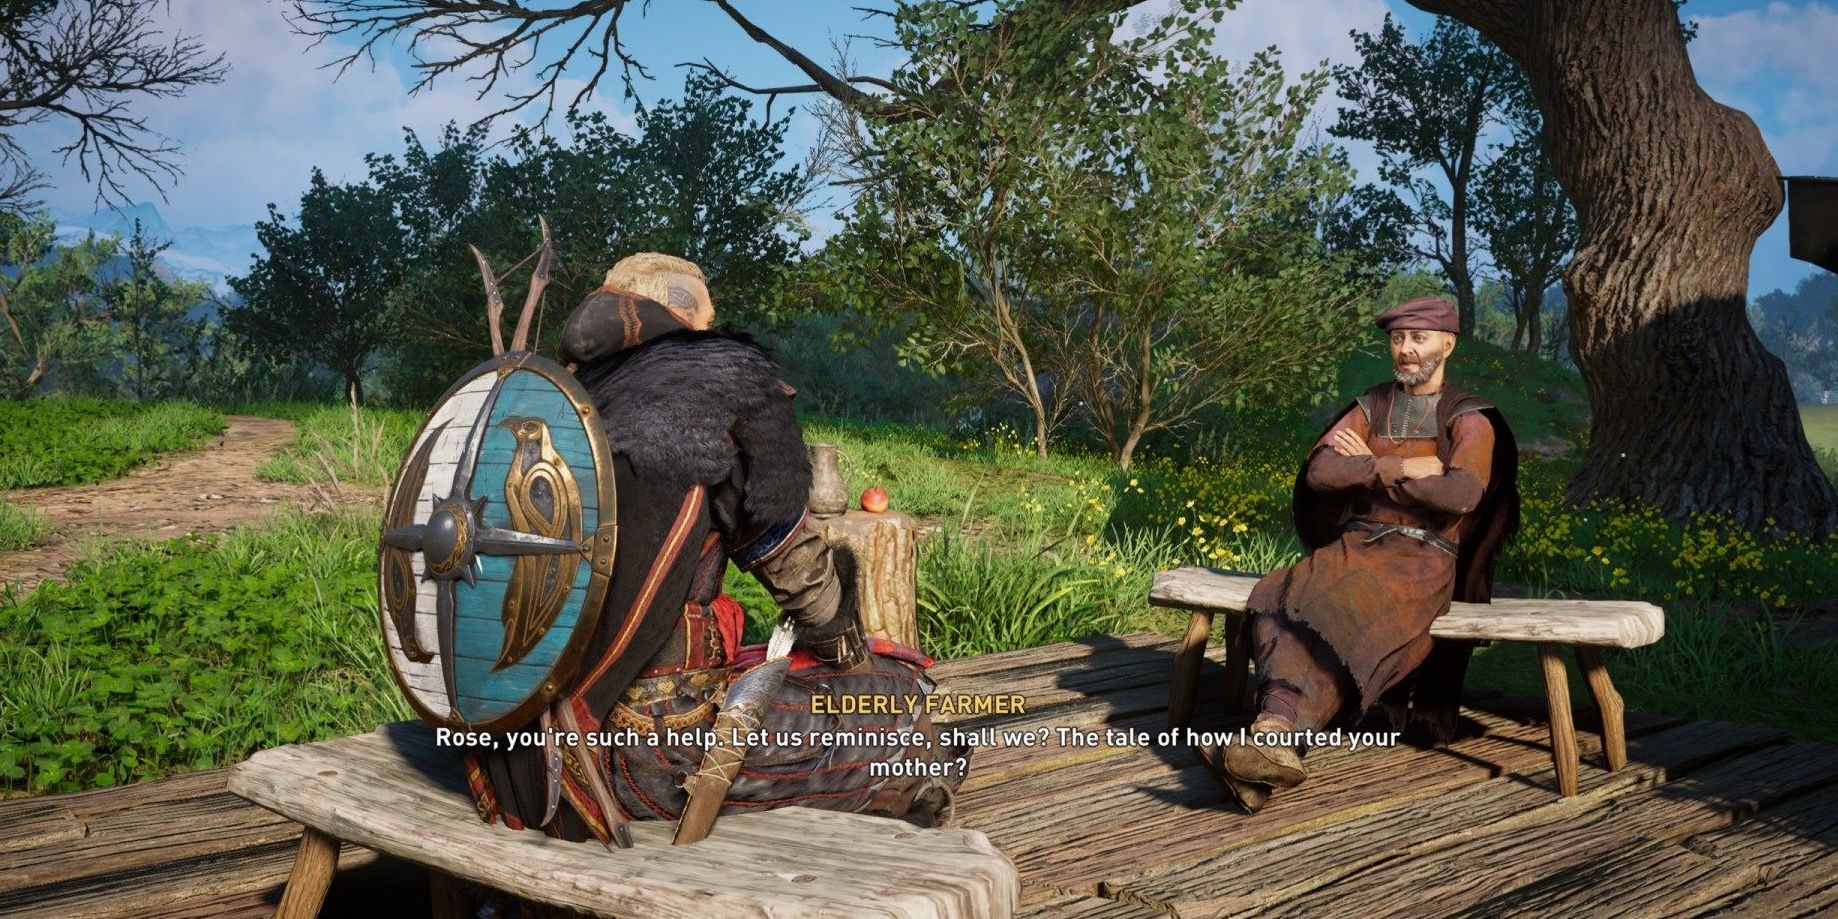 Eivor sitting on a bench talking to an elderly man about his daughter in Assassin's Creed Valhalla